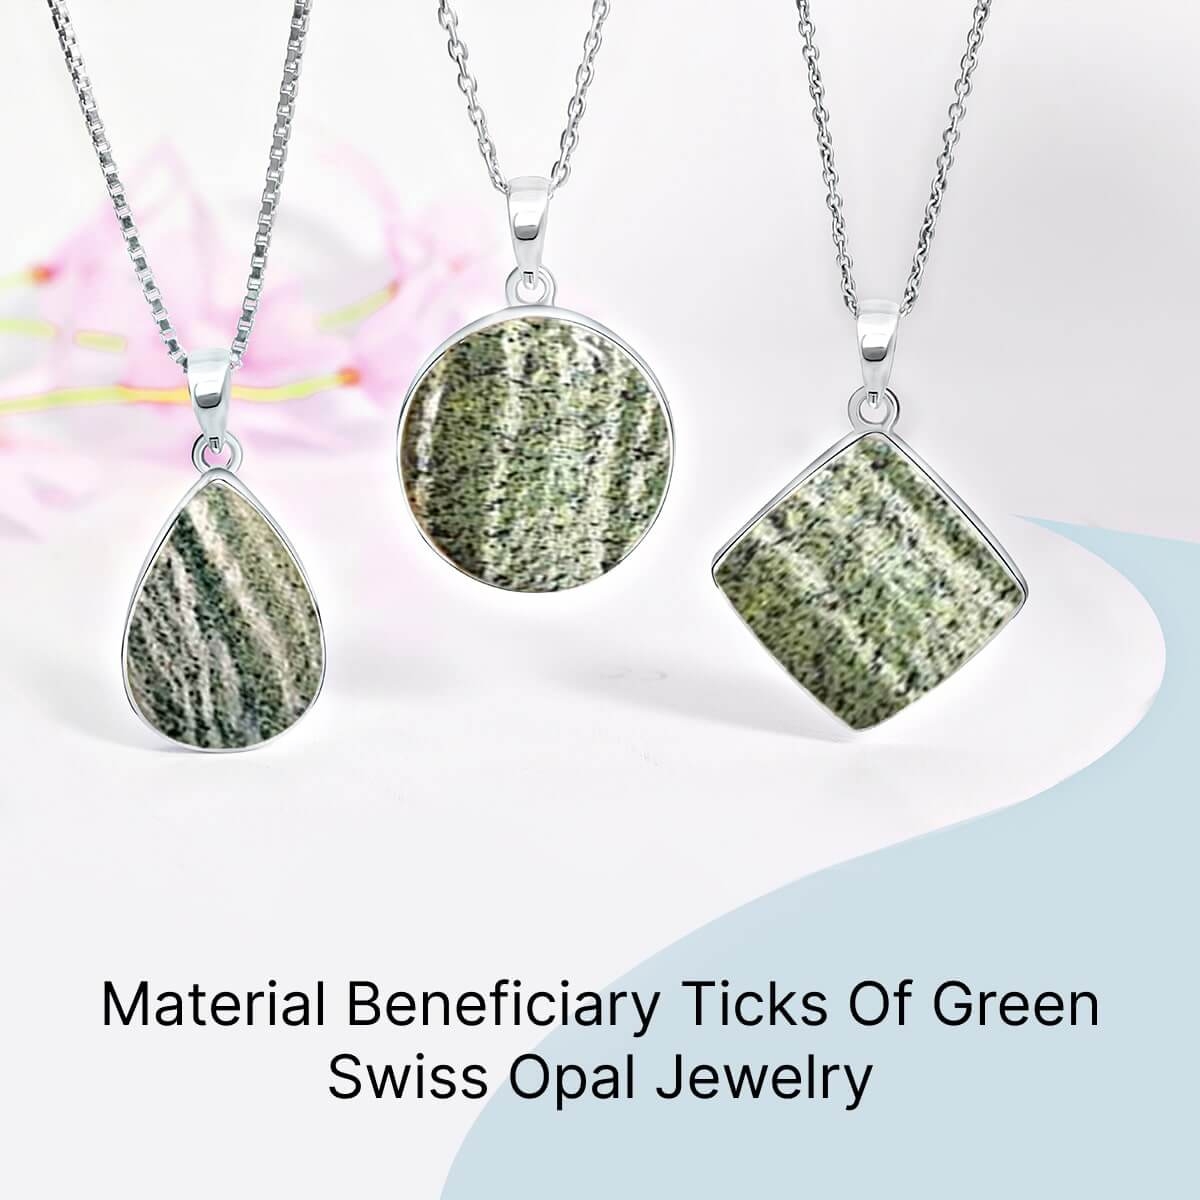 Physical Properties of Green Swiss Opal Jewelry